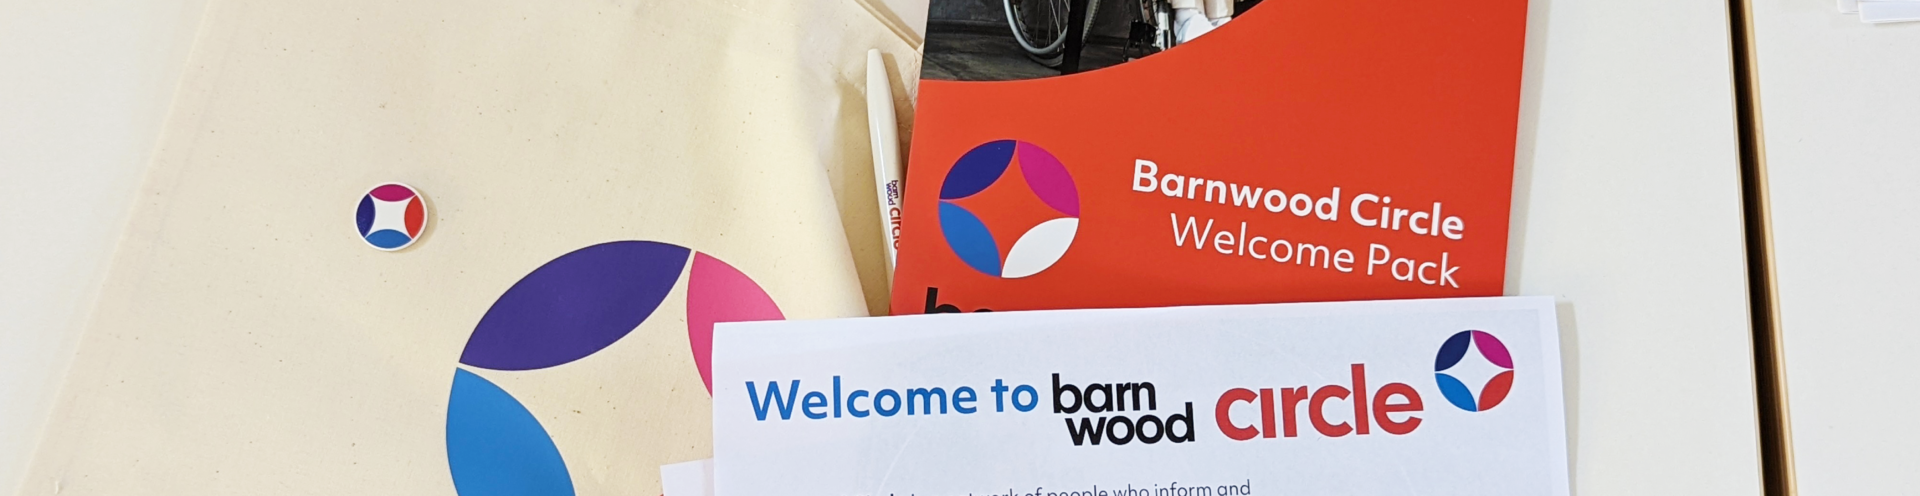 Photo of Barnwood Circle merchandise, a tote bag with the logo on, the welcome folder and a selection of inserts with details of the membership scheme